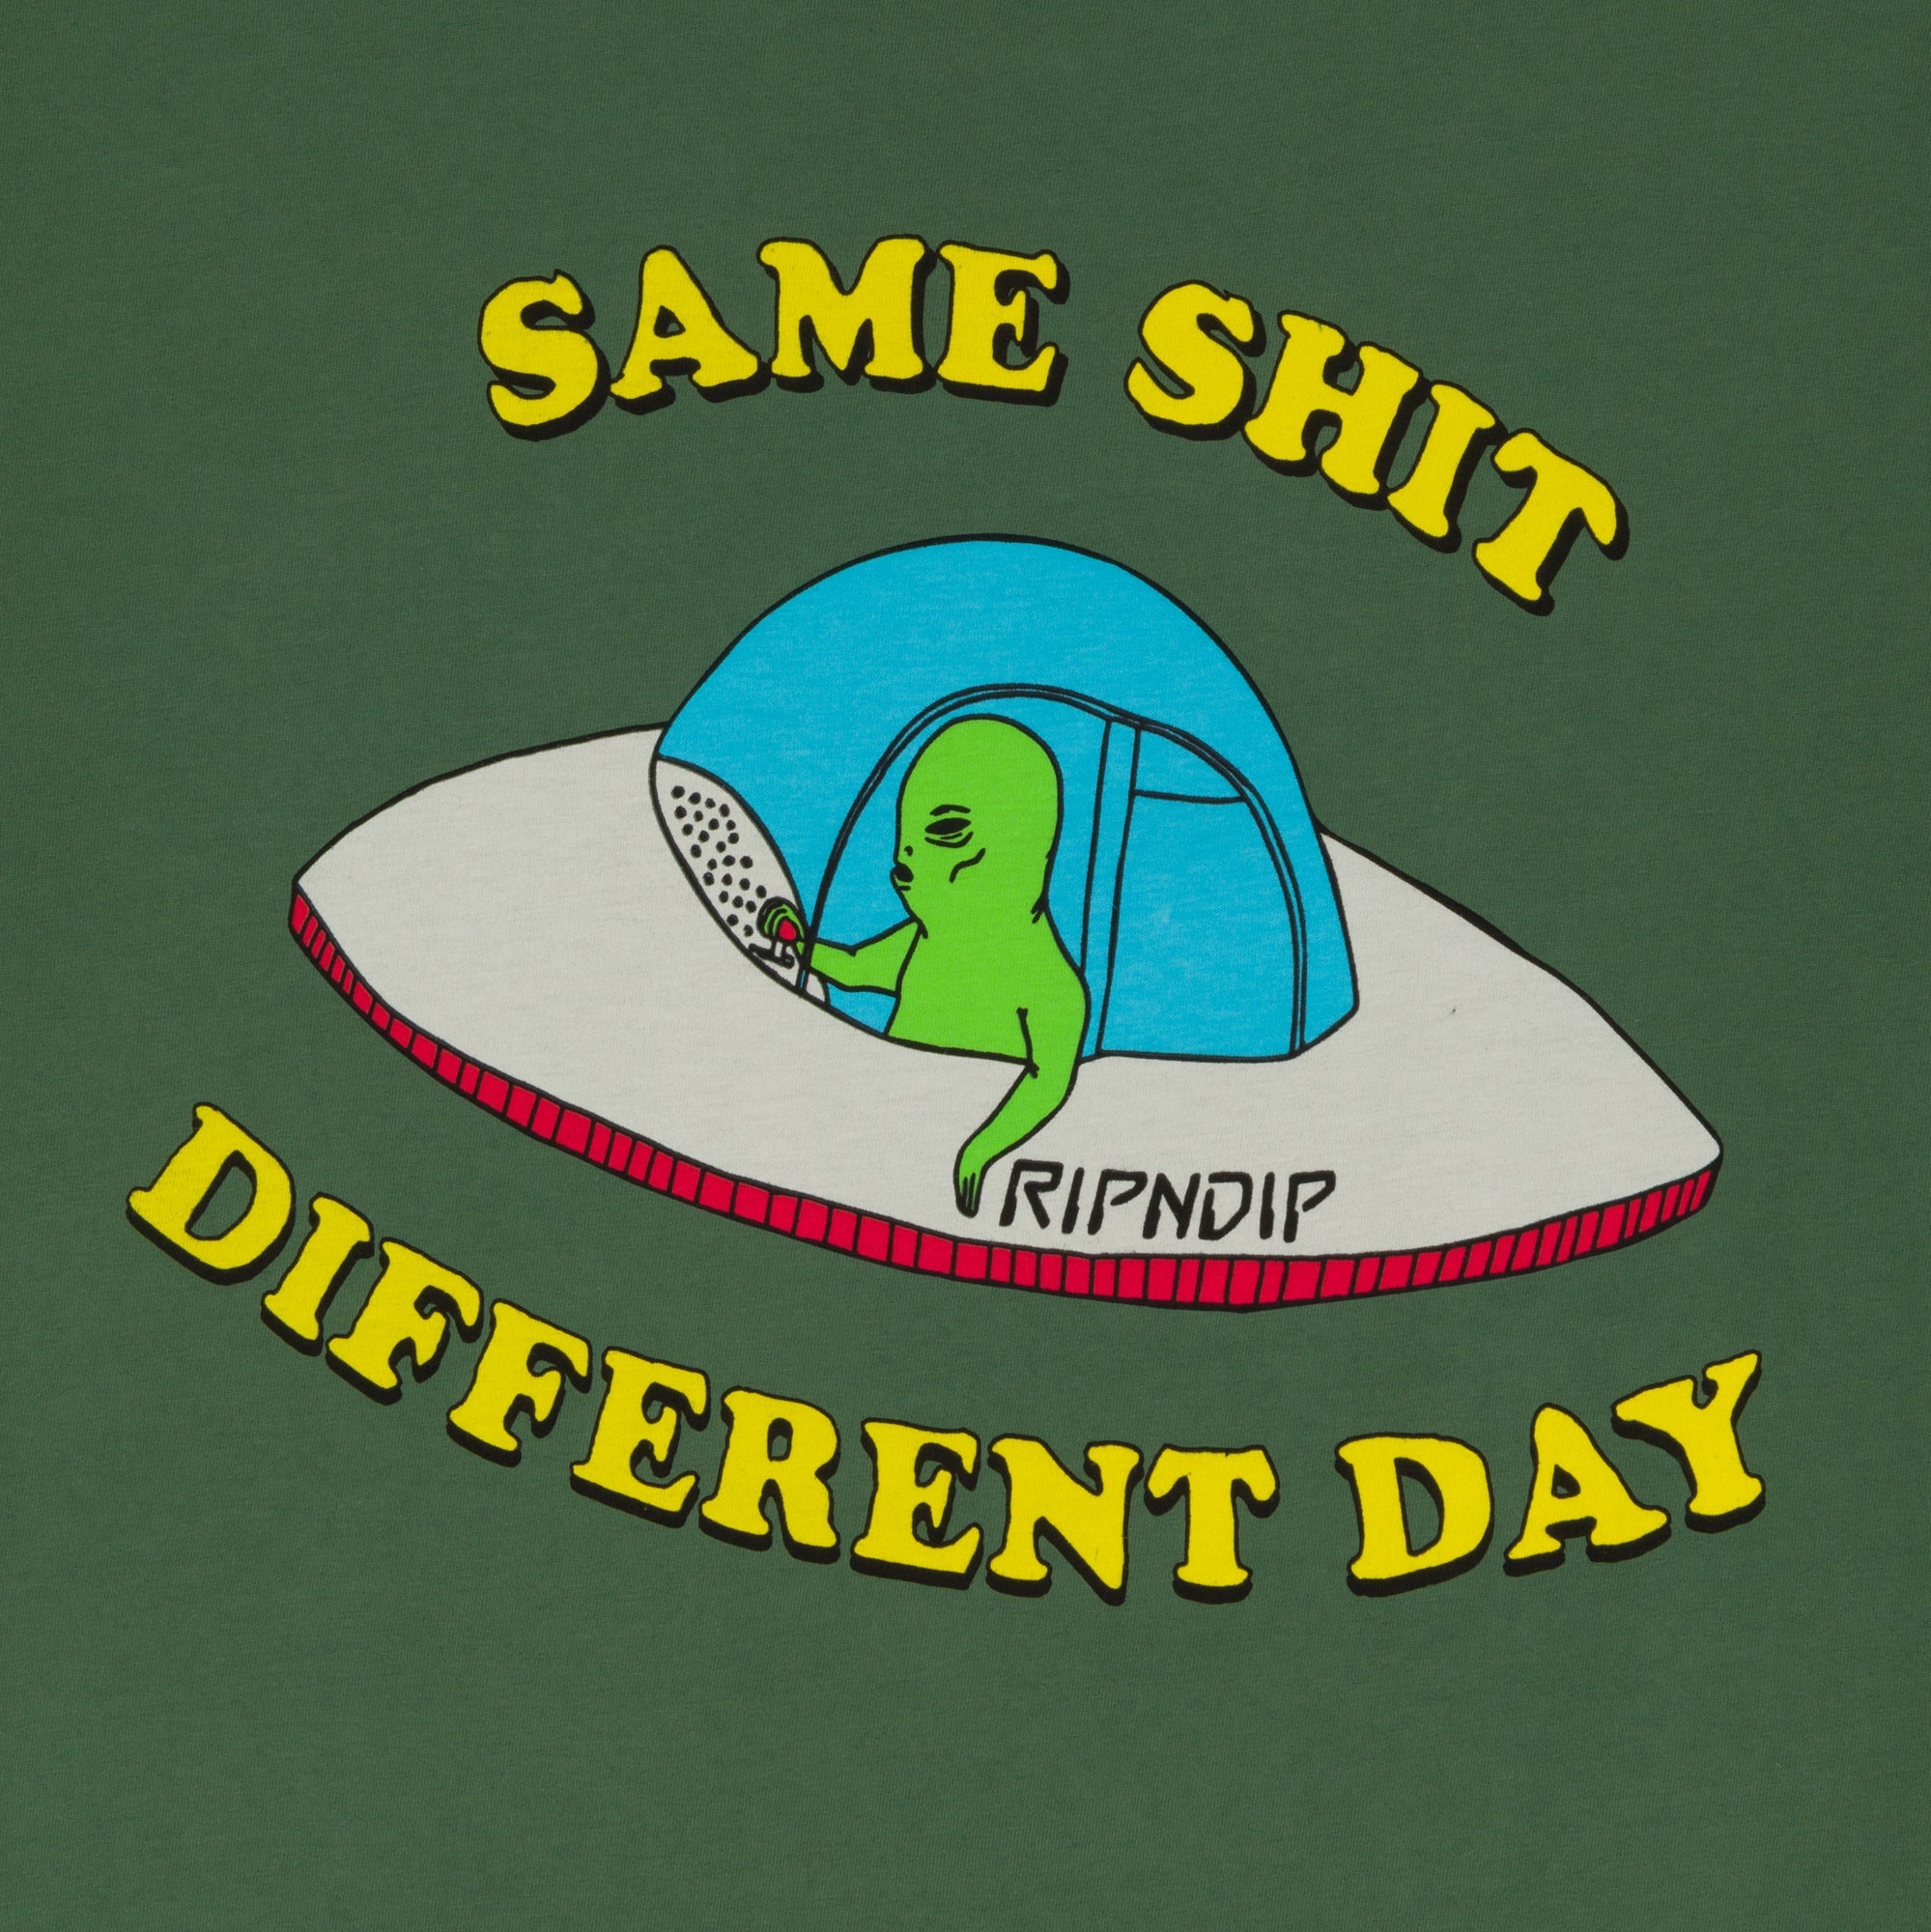 Same Shit Different Day Tee (Olive)